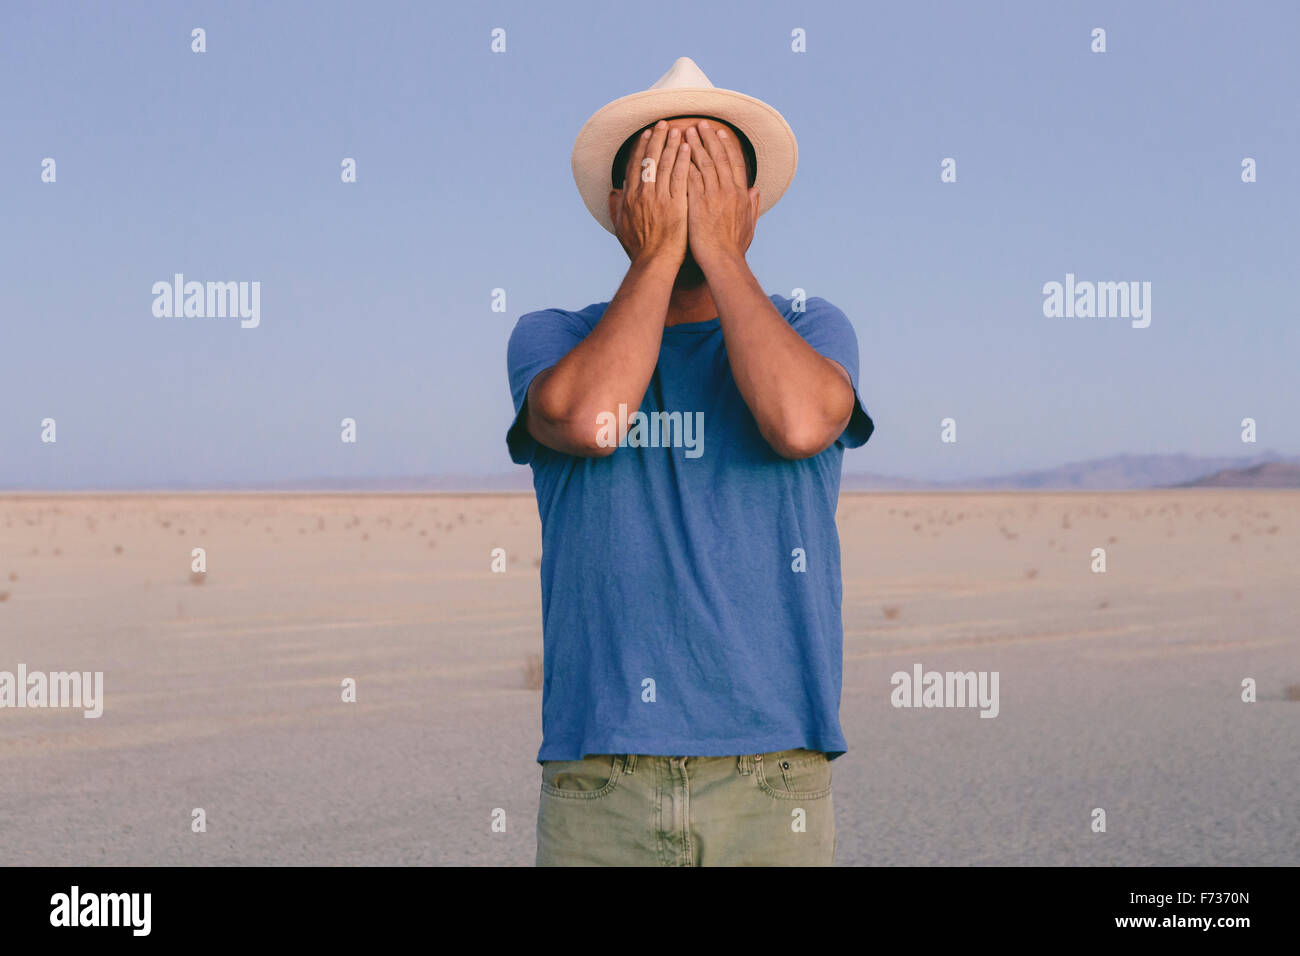 A man in an open desert landscape covering his face with his hands. Stock Photo